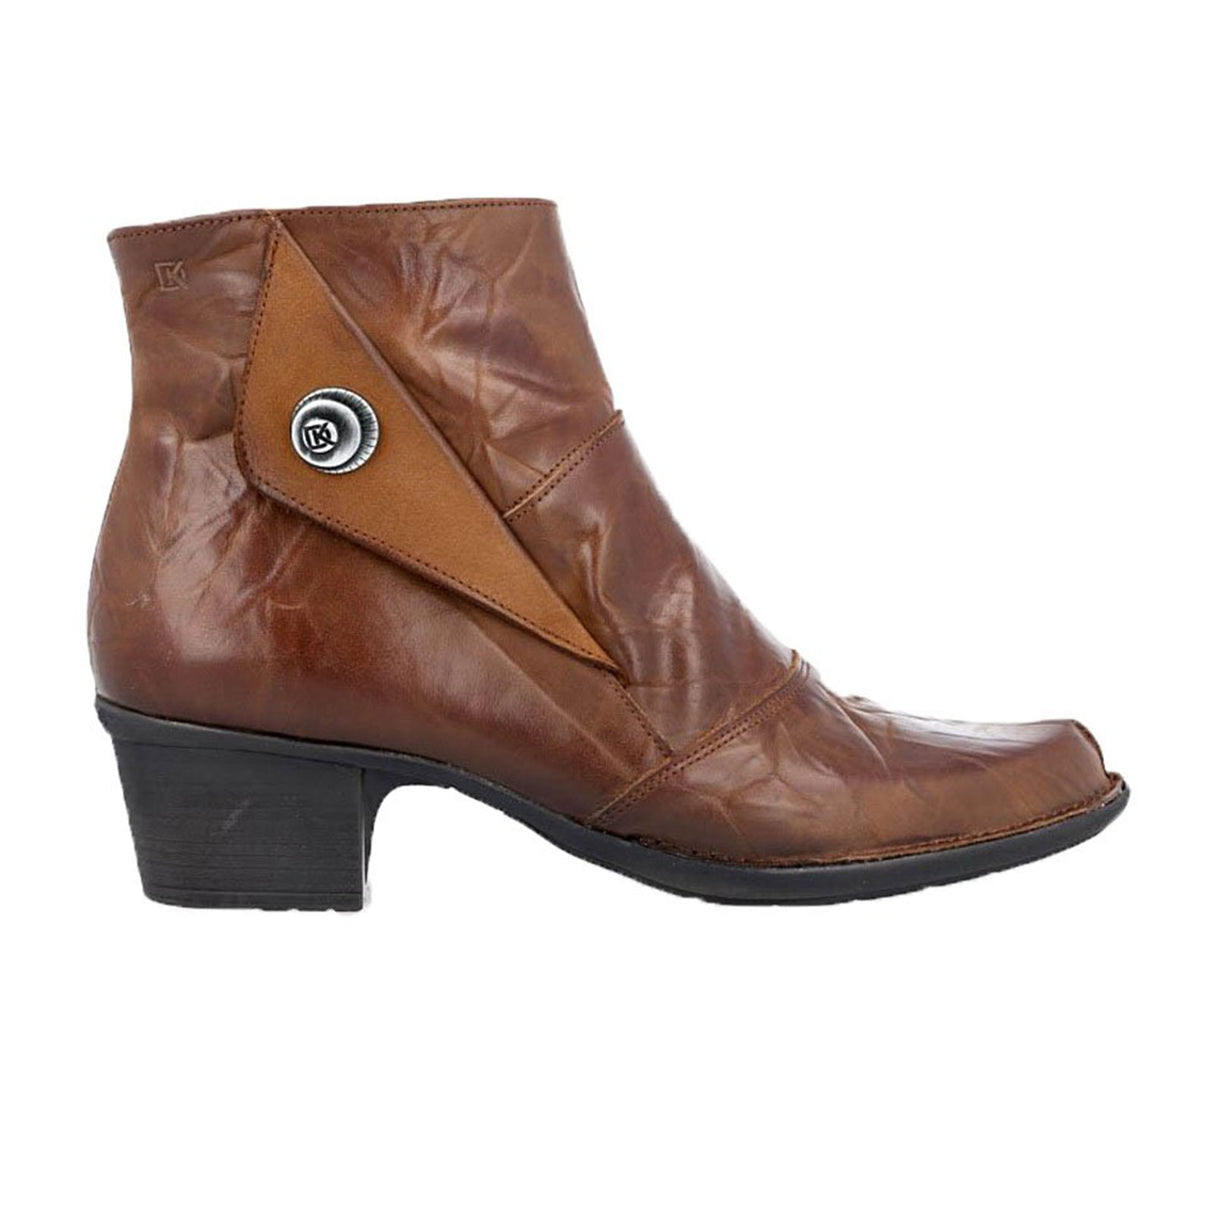 Dorking Dalma D8051 Ankle Boot (Women) - Cognac Boots - Fashion - Ankle Boot - The Heel Shoe Fitters